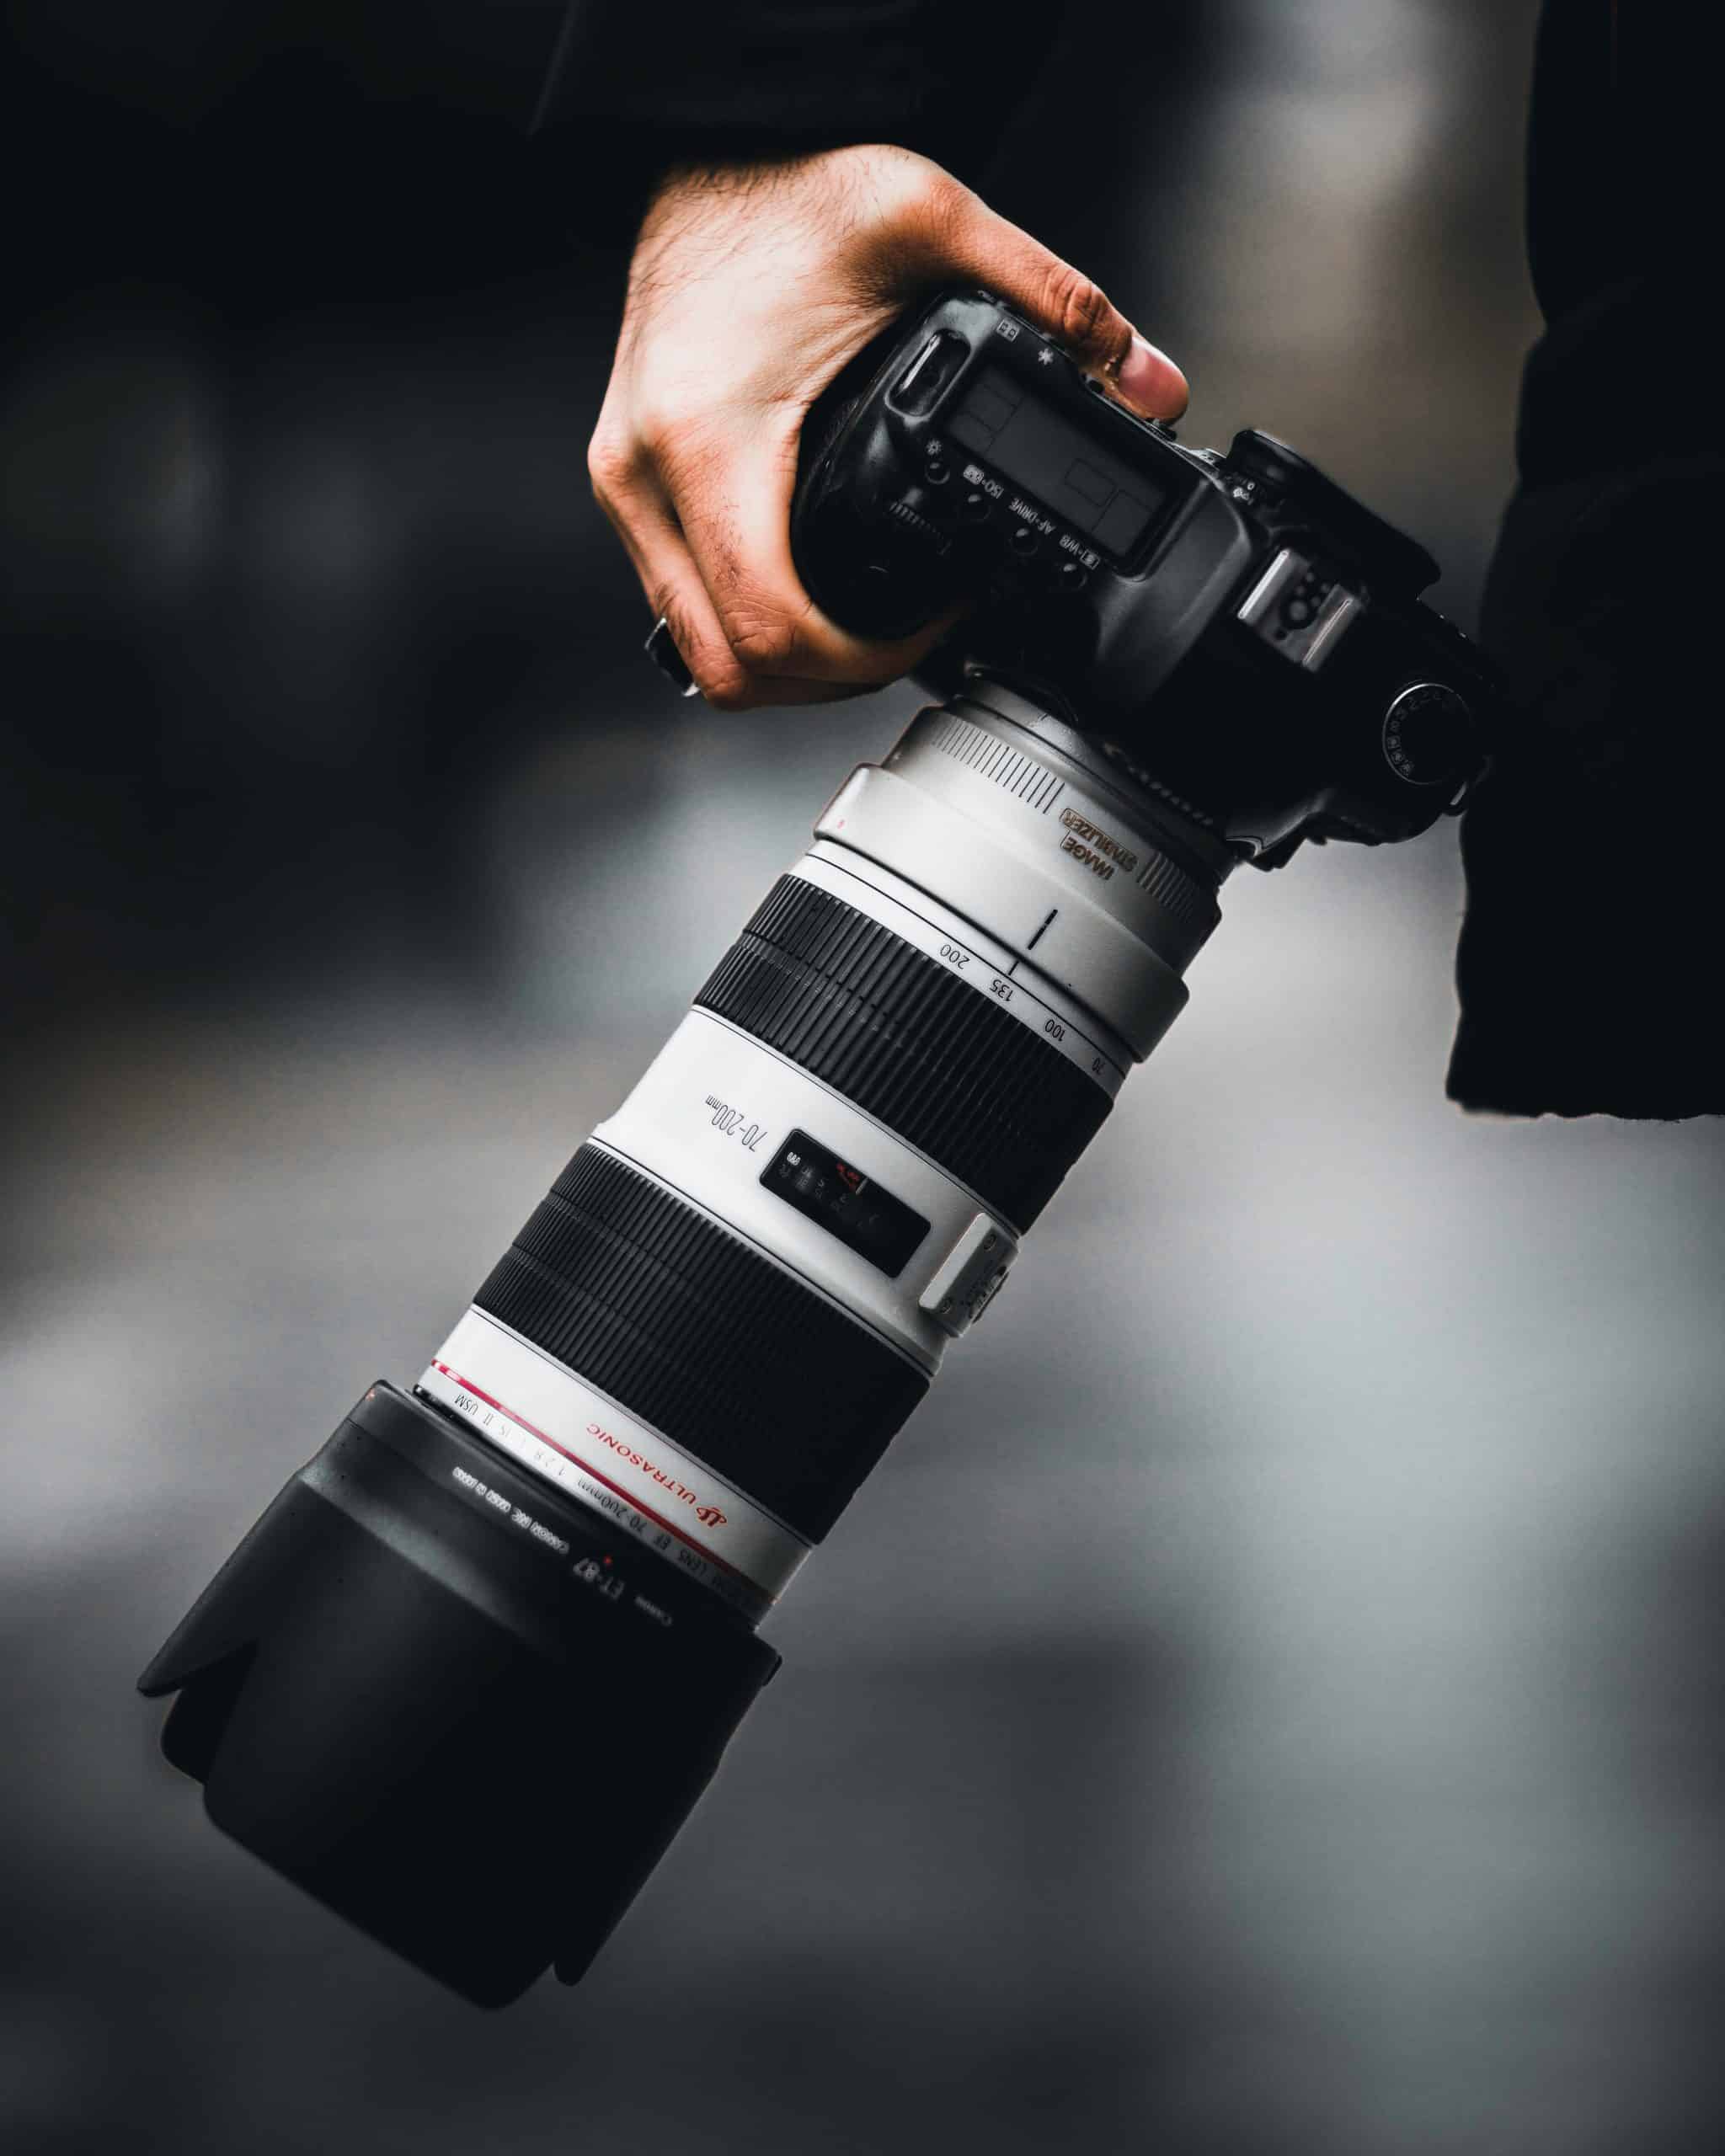 Tips for getting the most out of your camera lens